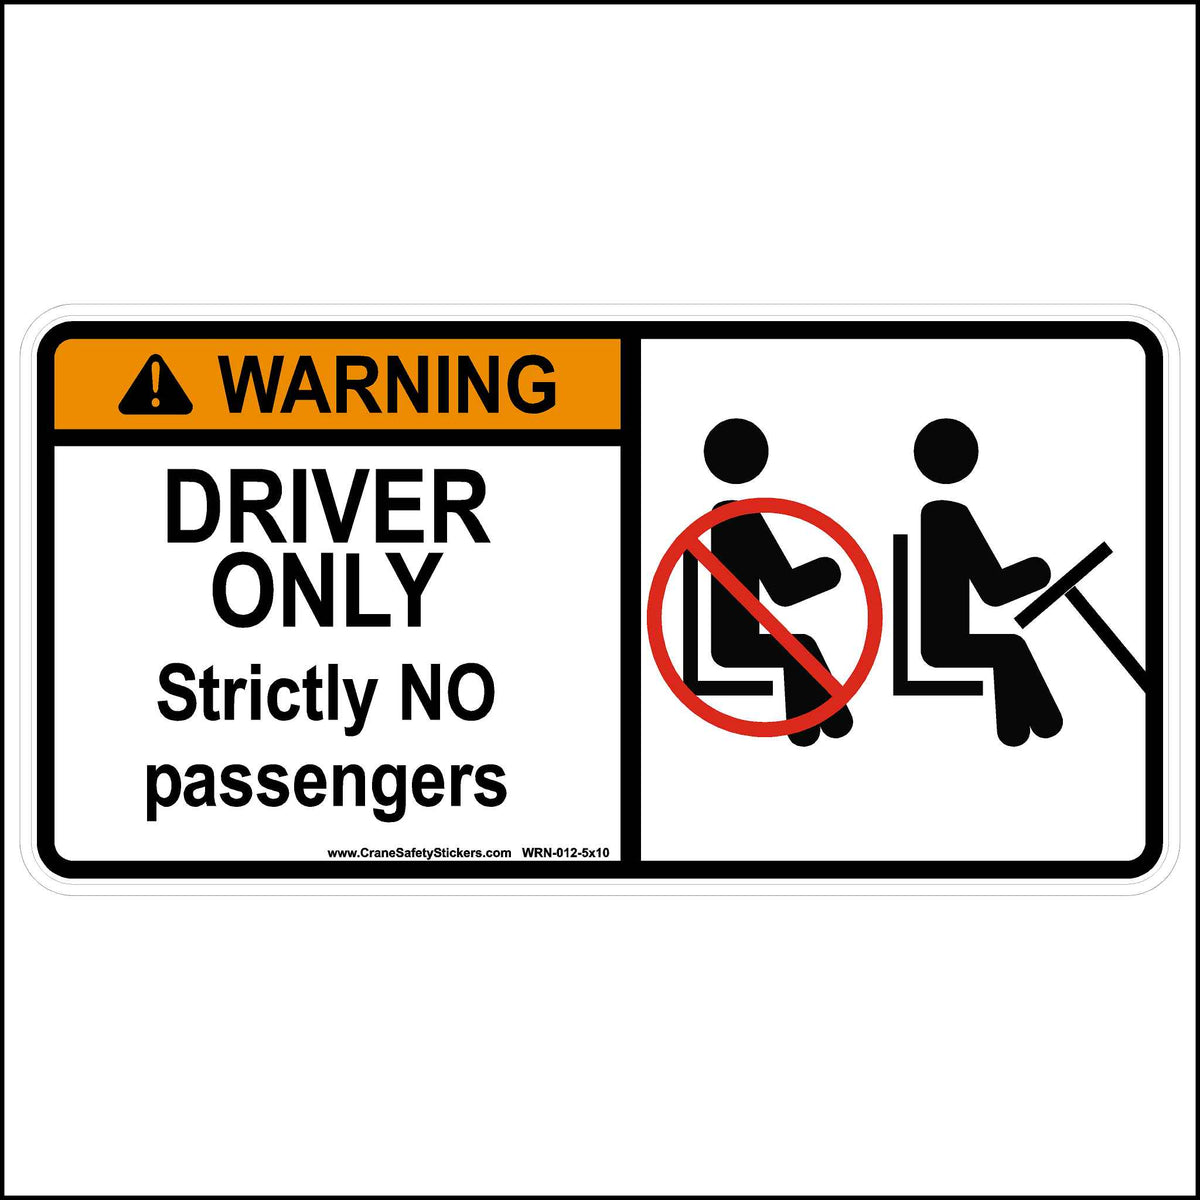 This Warning Driver Only Strictly No Passengers Sticker Is Printed With. WARNING!  Driver Only Strictly No Passengers. 5 inch by 10 inches in size.